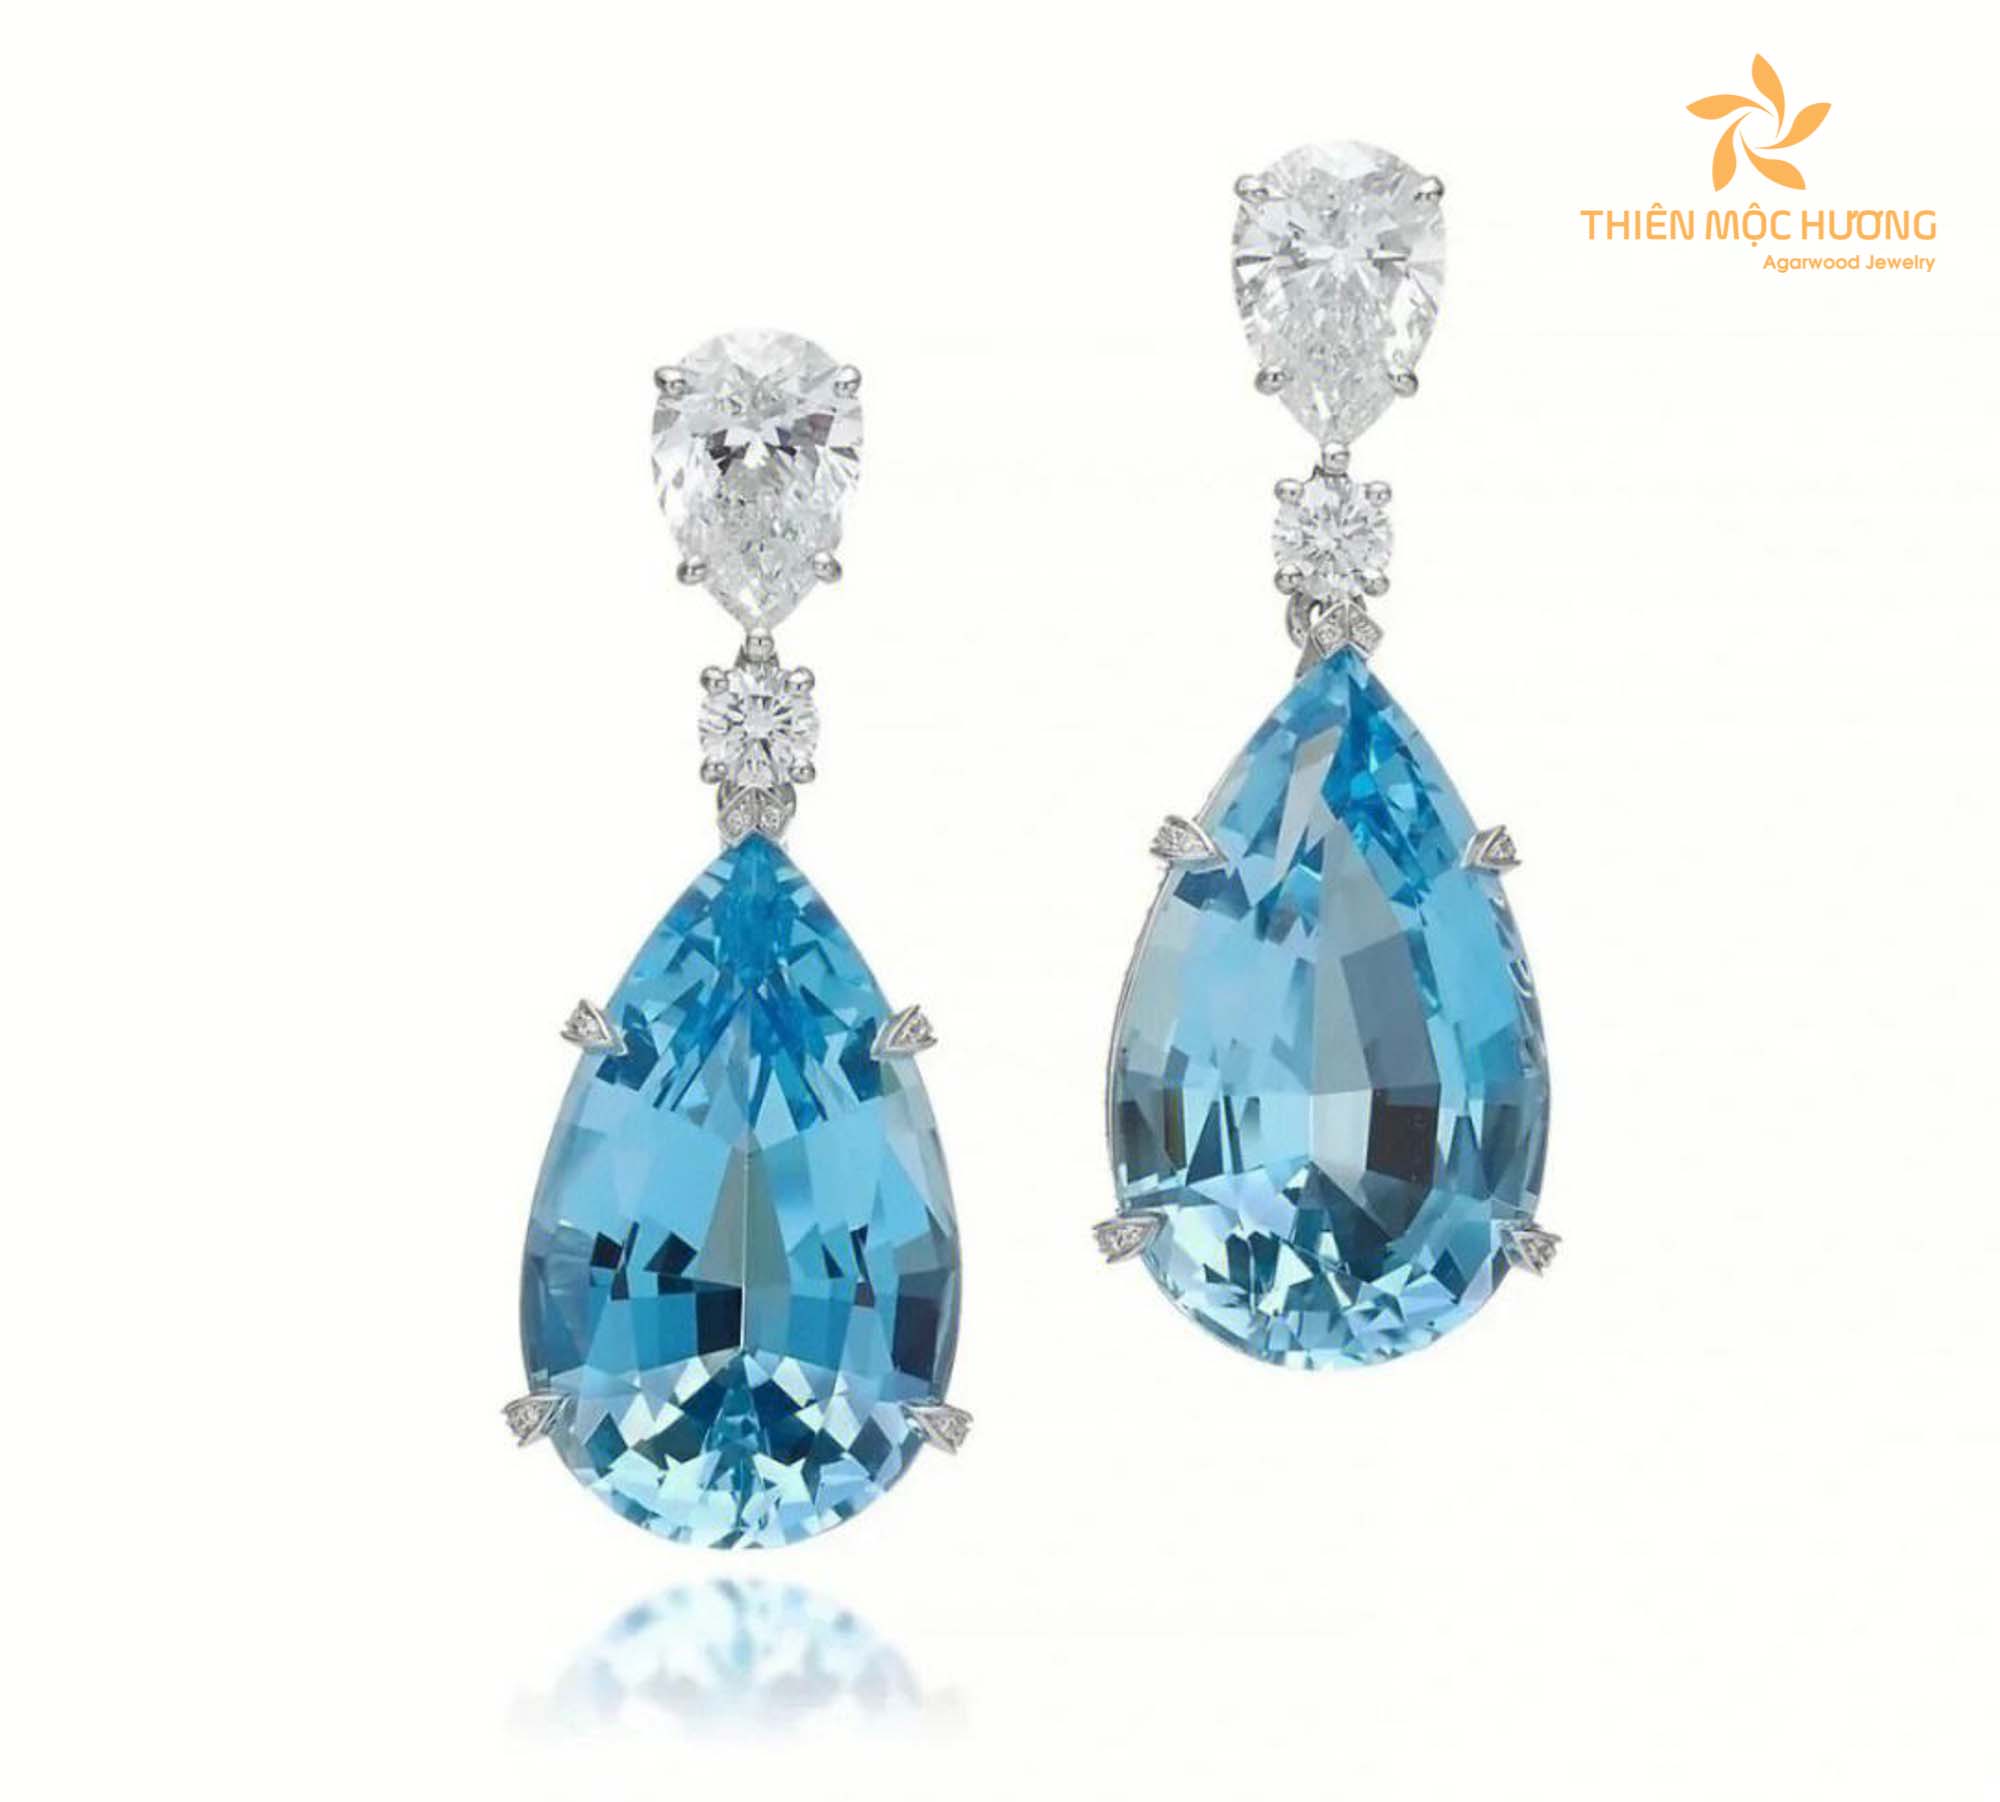 Aquamarine stone price, its various factors affecting the cost, and why it remains one of the most sought-after gemstones